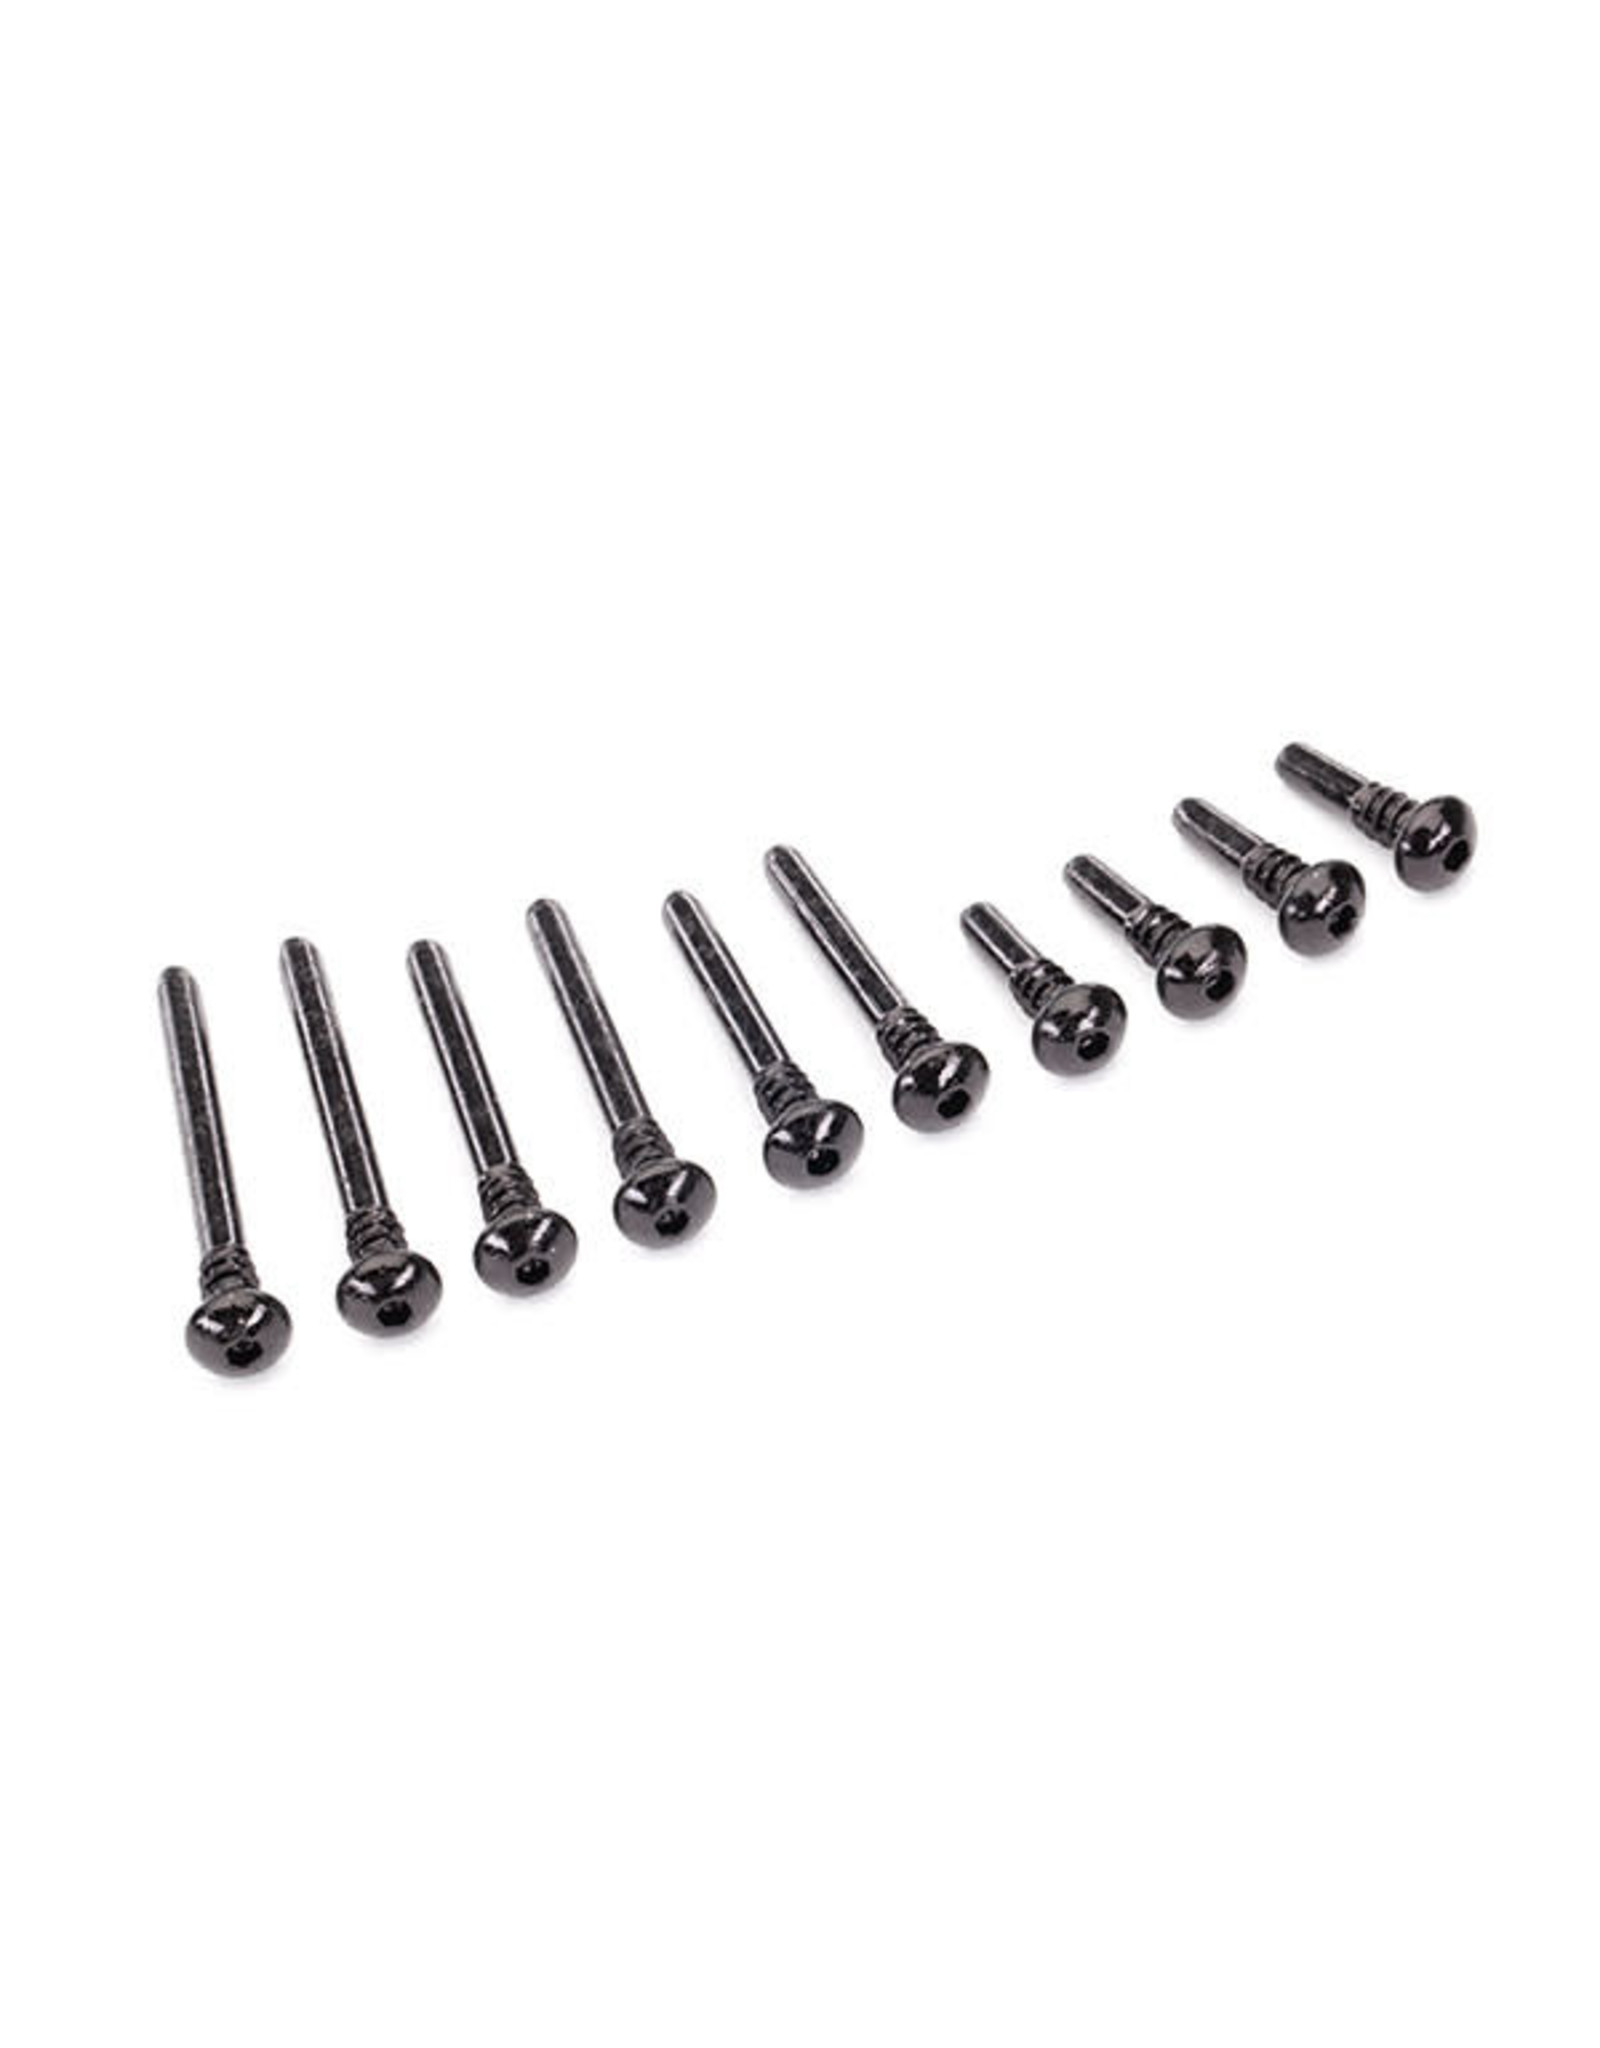 Traxxas Suspension screw pin set, front or rear (hardened steel), 4x18mm (4), 4x38mm (2), 4x33mm (2), 4x43mm (2)